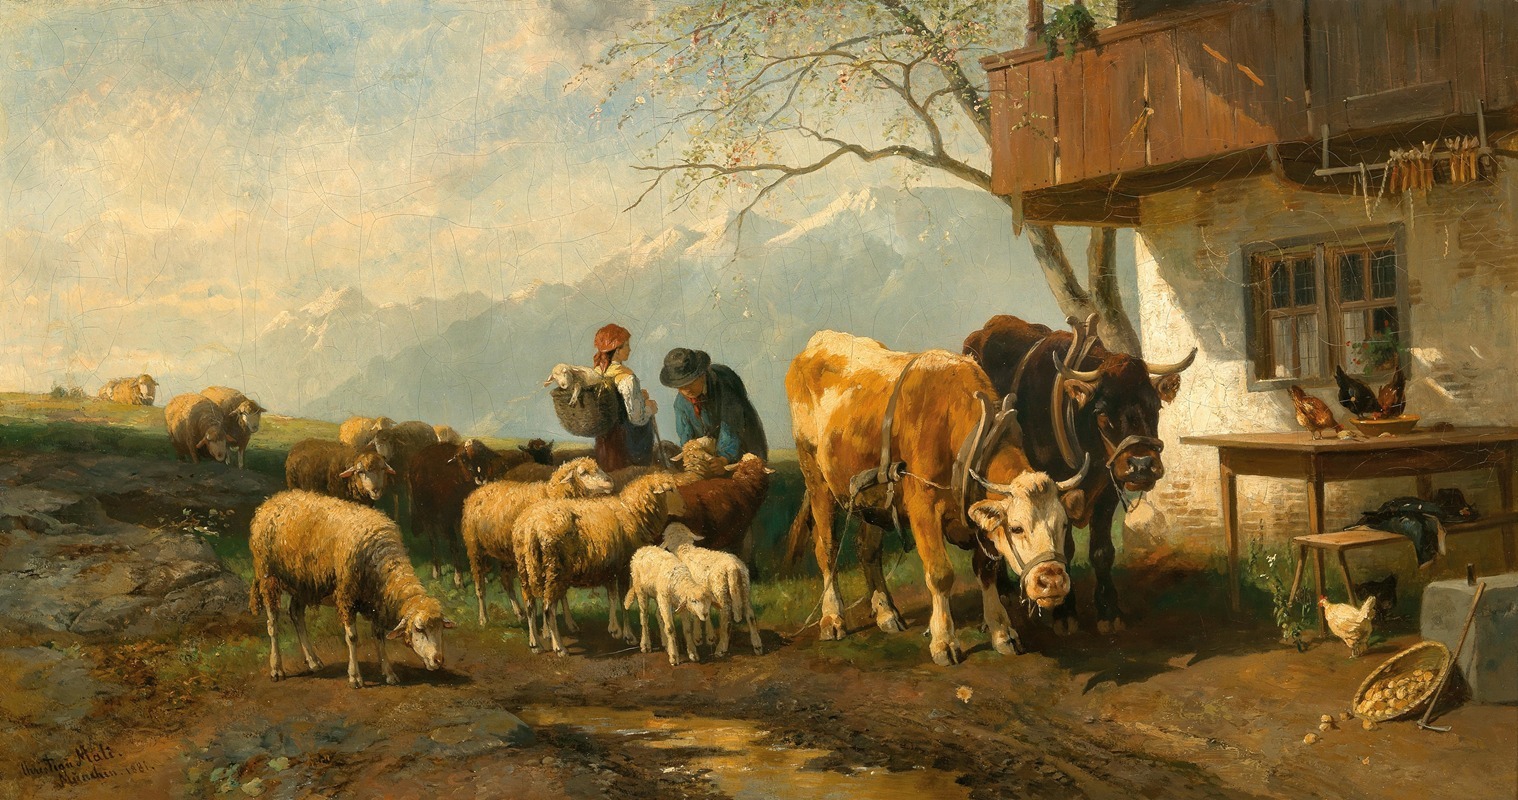 Christian Friedrich Mali - A Shepherdess with Her Cattle on an Alpine Pasture